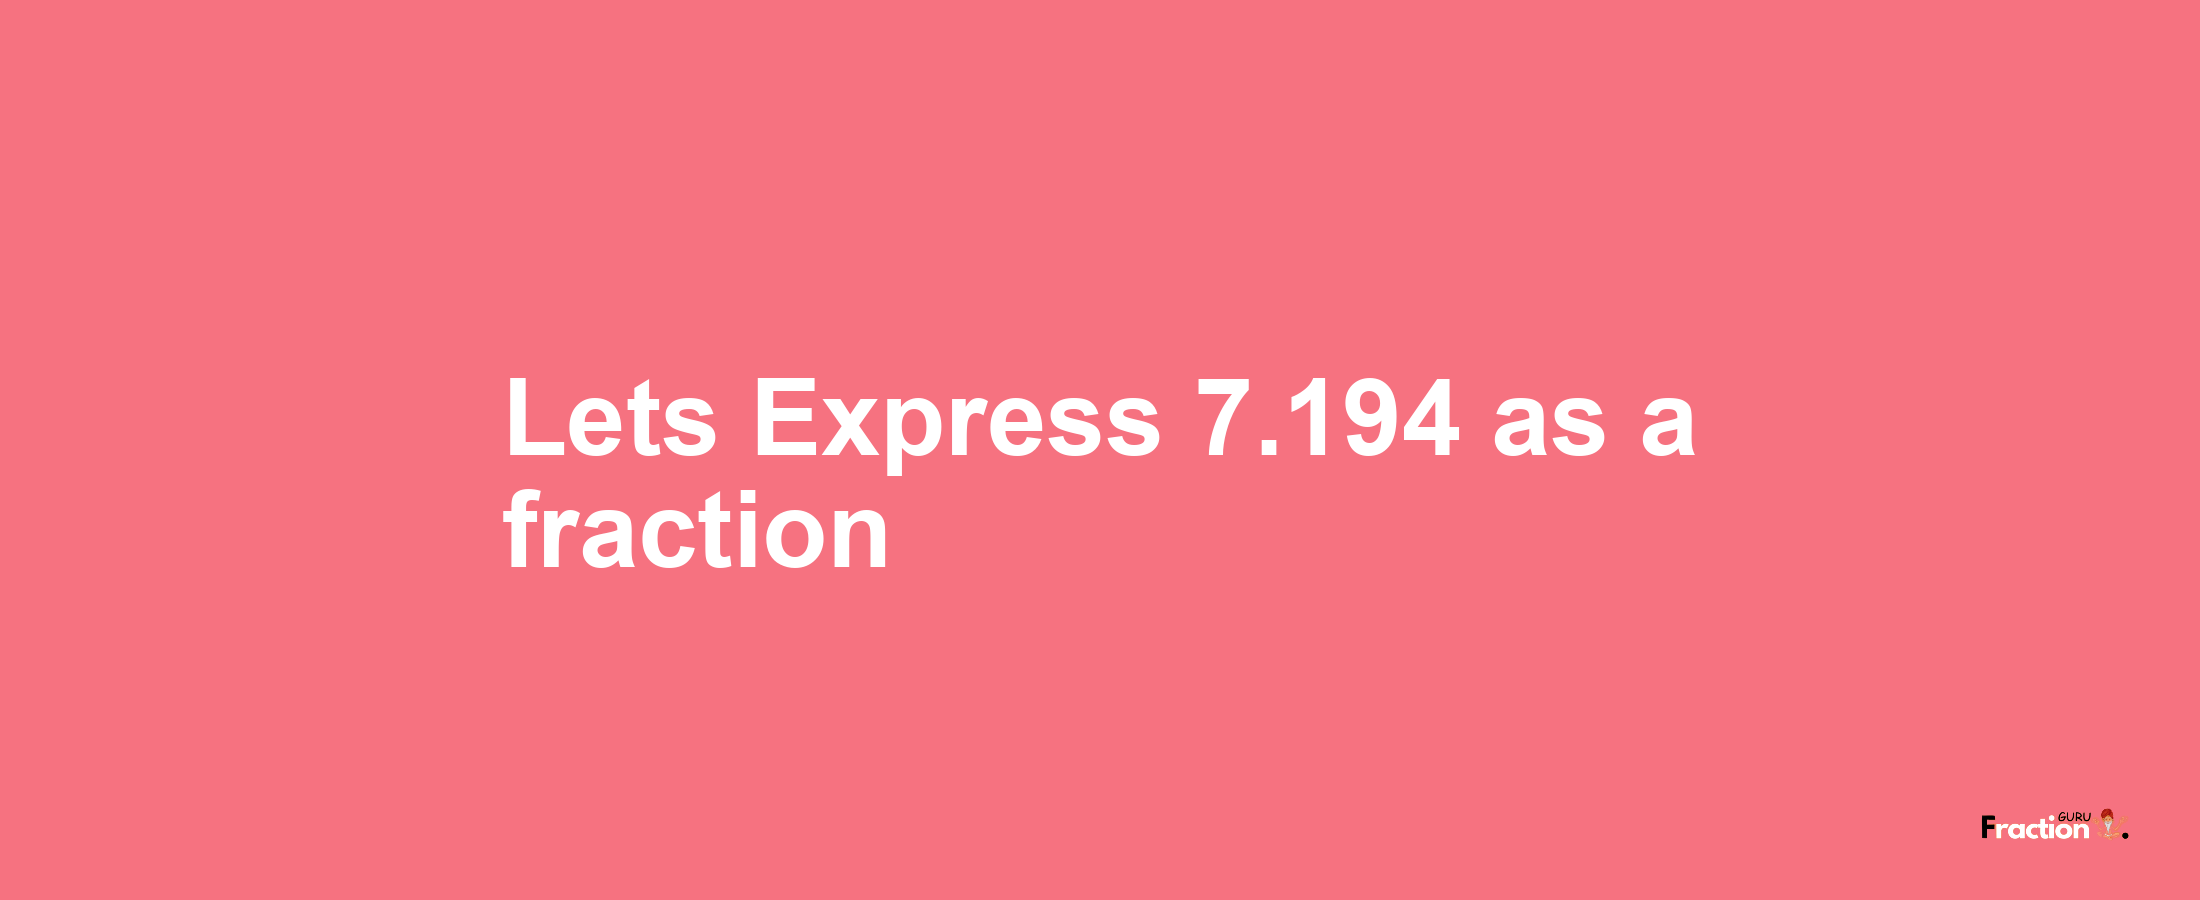 Lets Express 7.194 as afraction